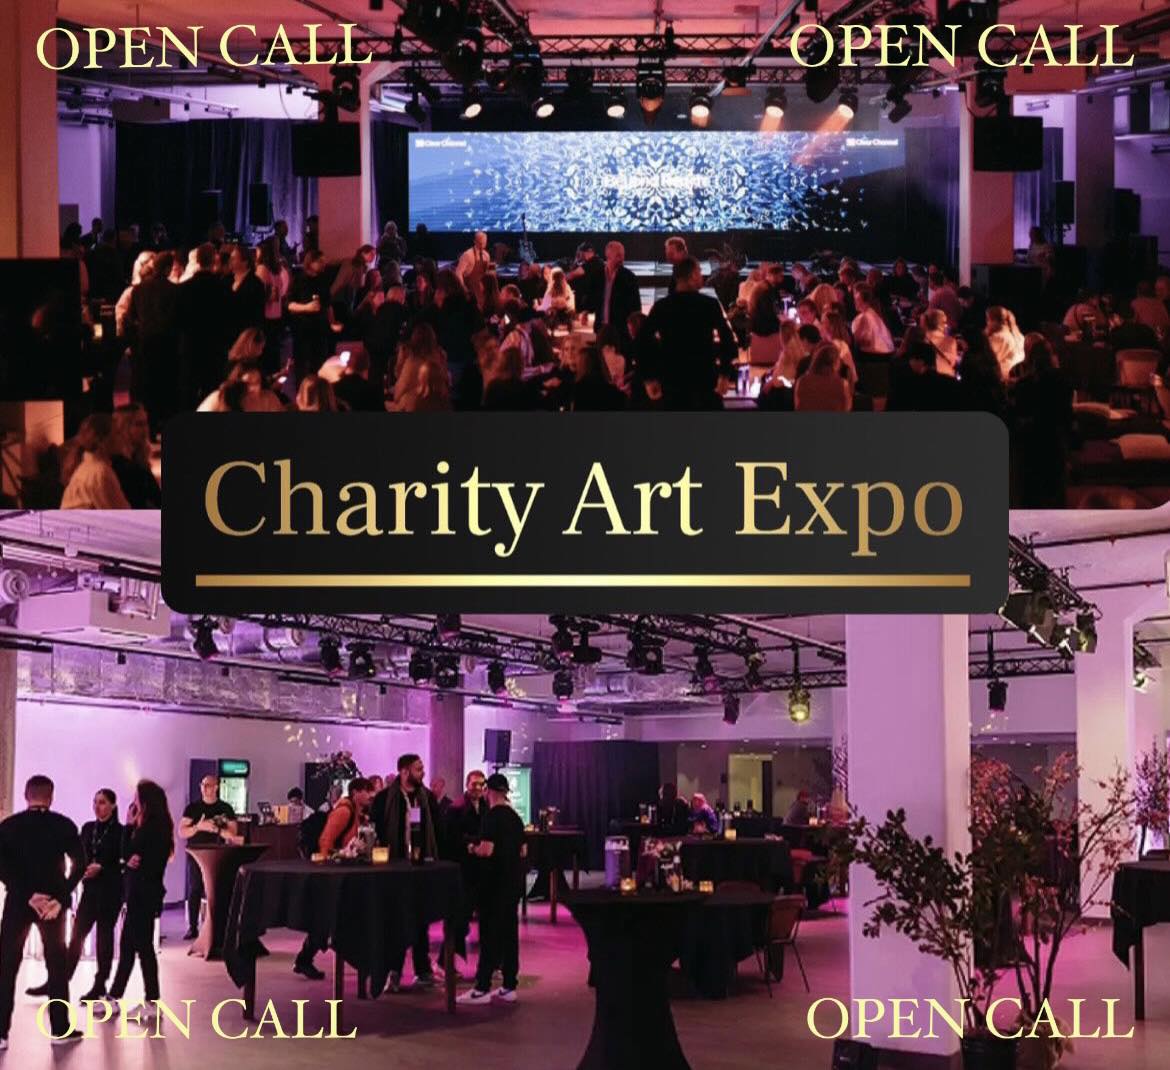 Call for Artists: Showcase Your Artistry at the Charity Art Expo